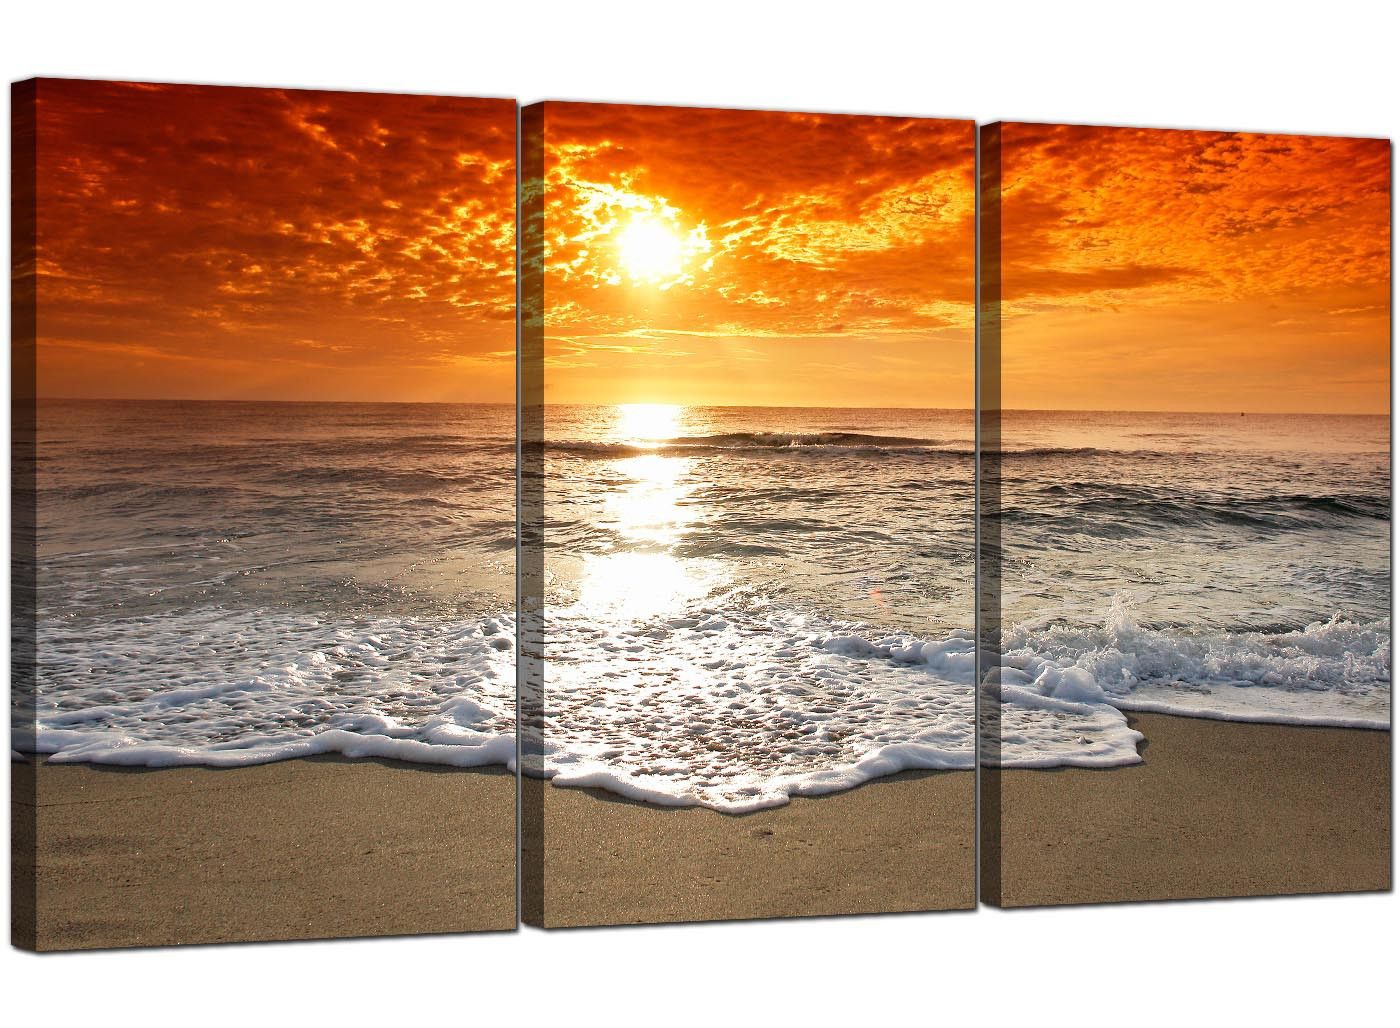 Cheap Beach Sunset Canvas Prints Uk Set Of 3 For Your In Sunset Wall Art (View 15 of 15)